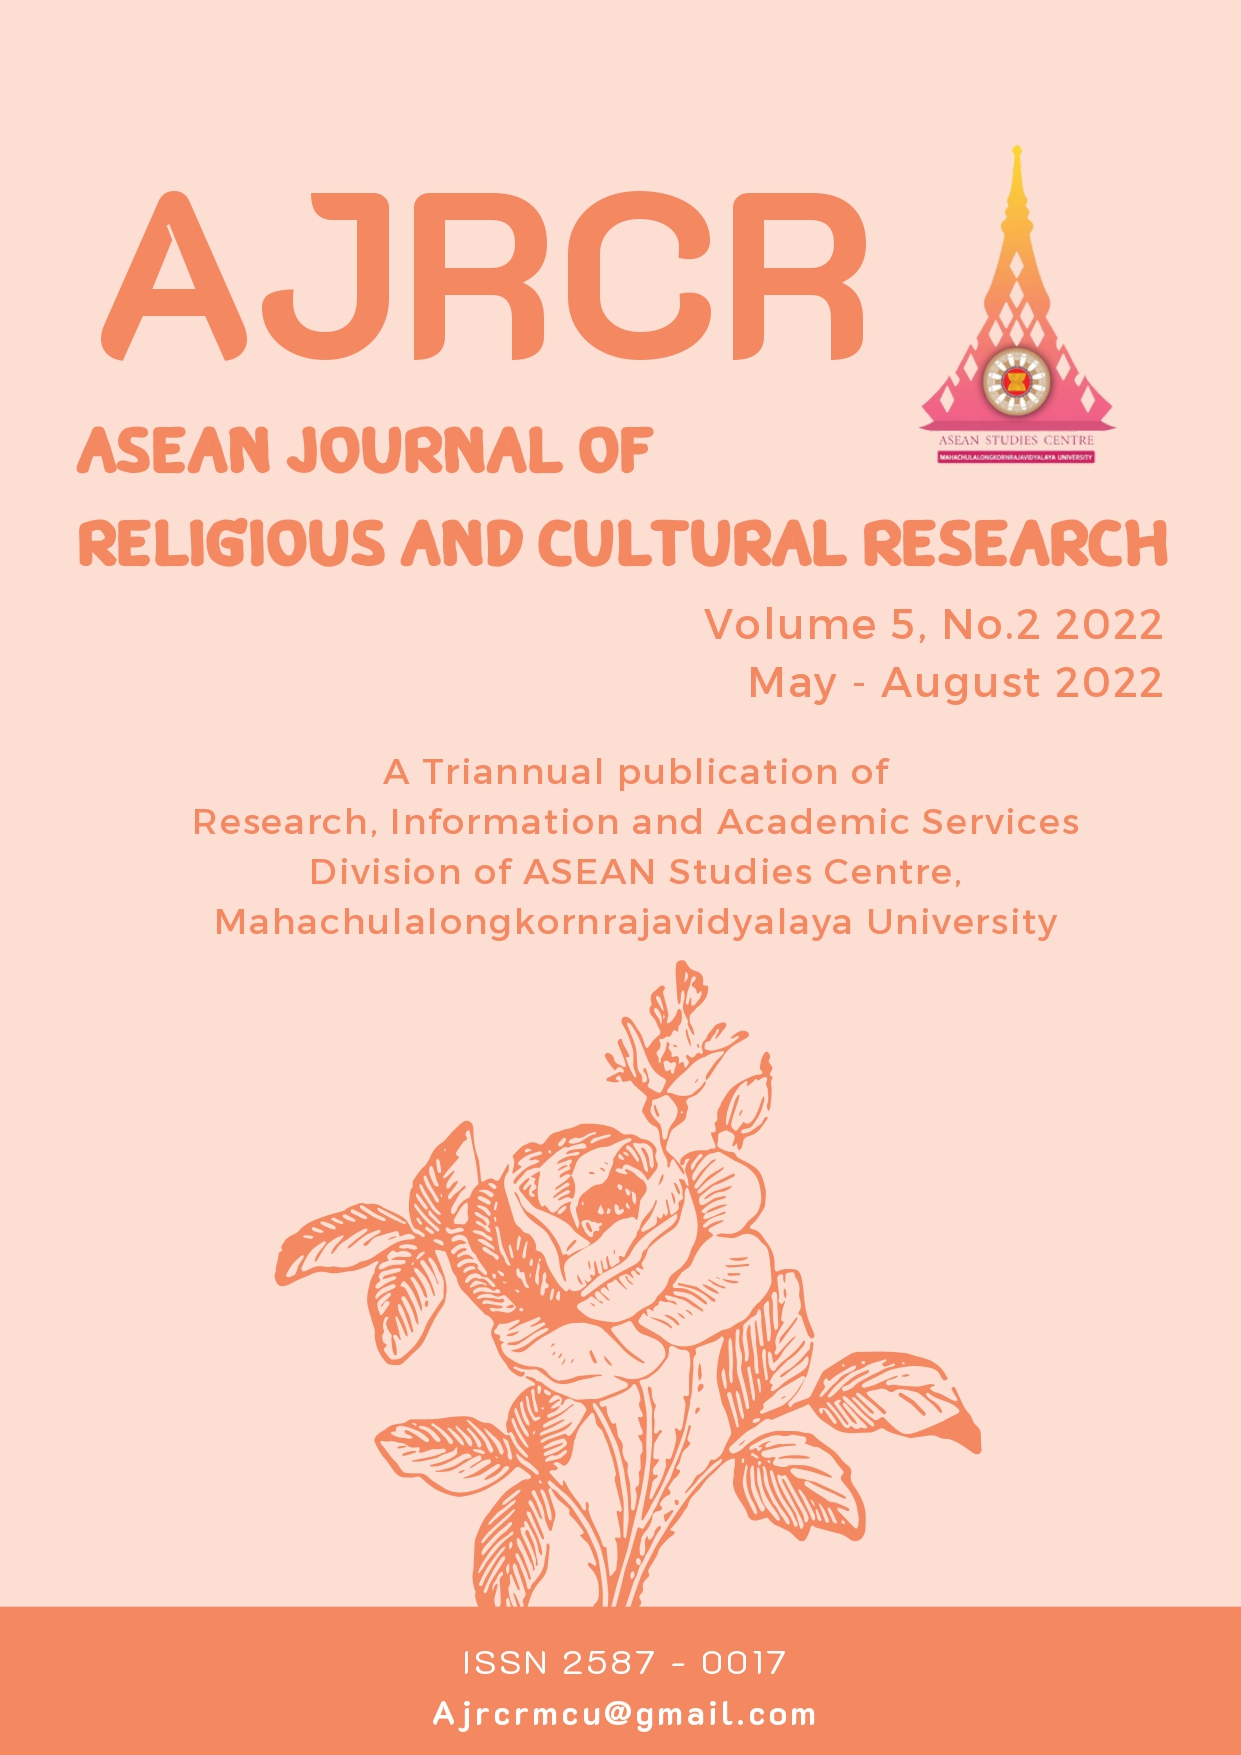 					View Vol. 5 No. 2 (2022): ASEAN Journal of Religious and Cultural Research (AJRCR)
				